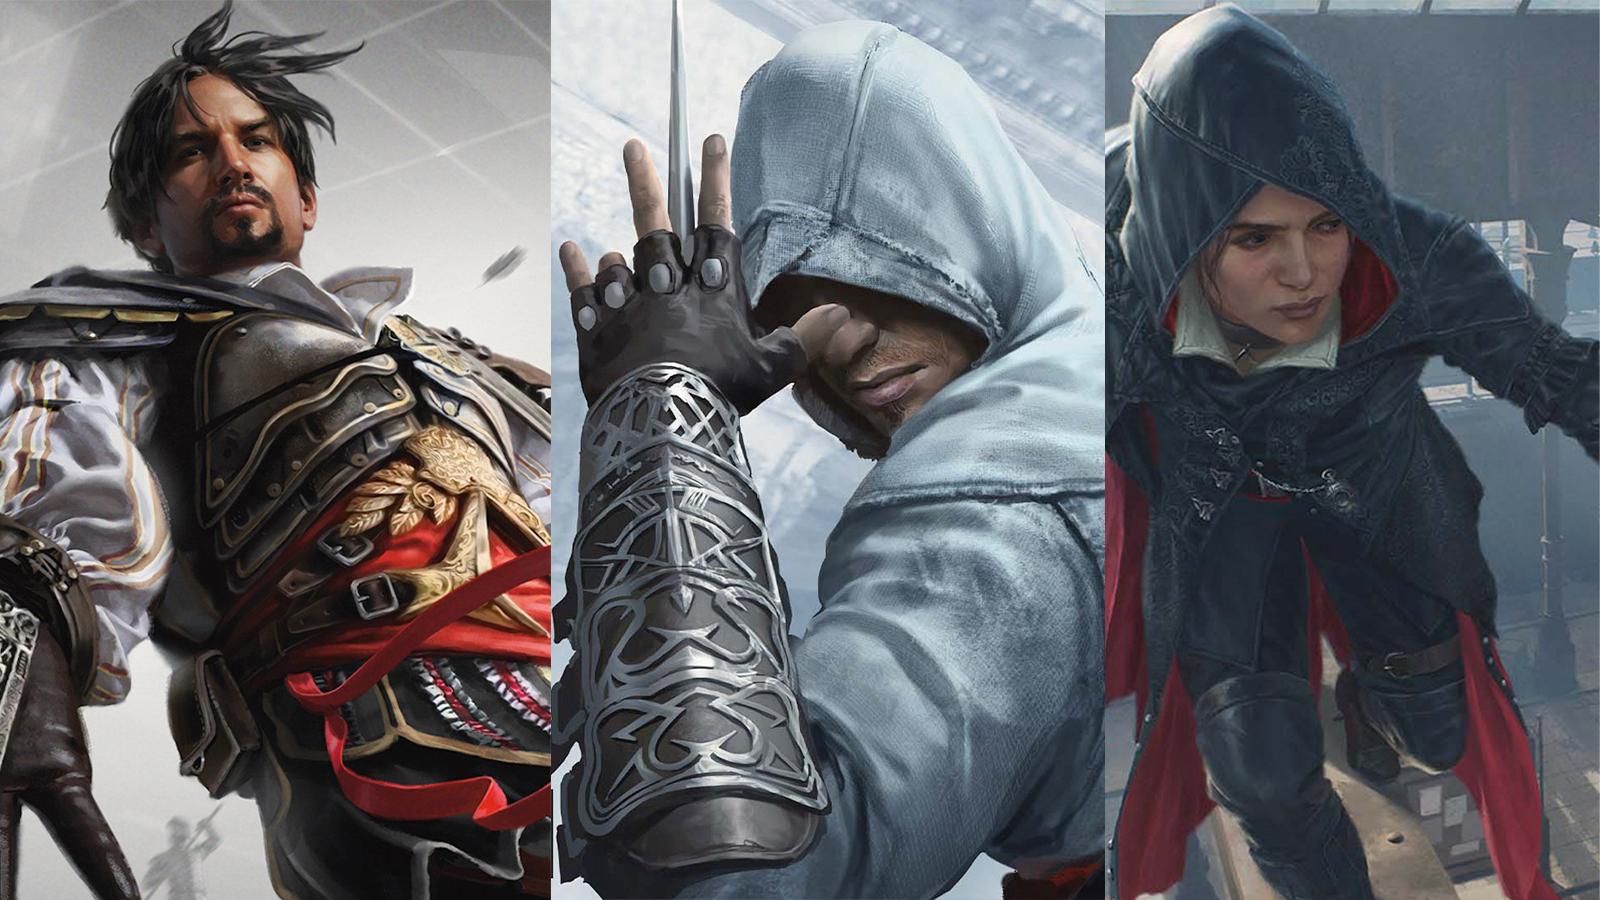 ezio, altair, evie from assassin's creed mtg cards